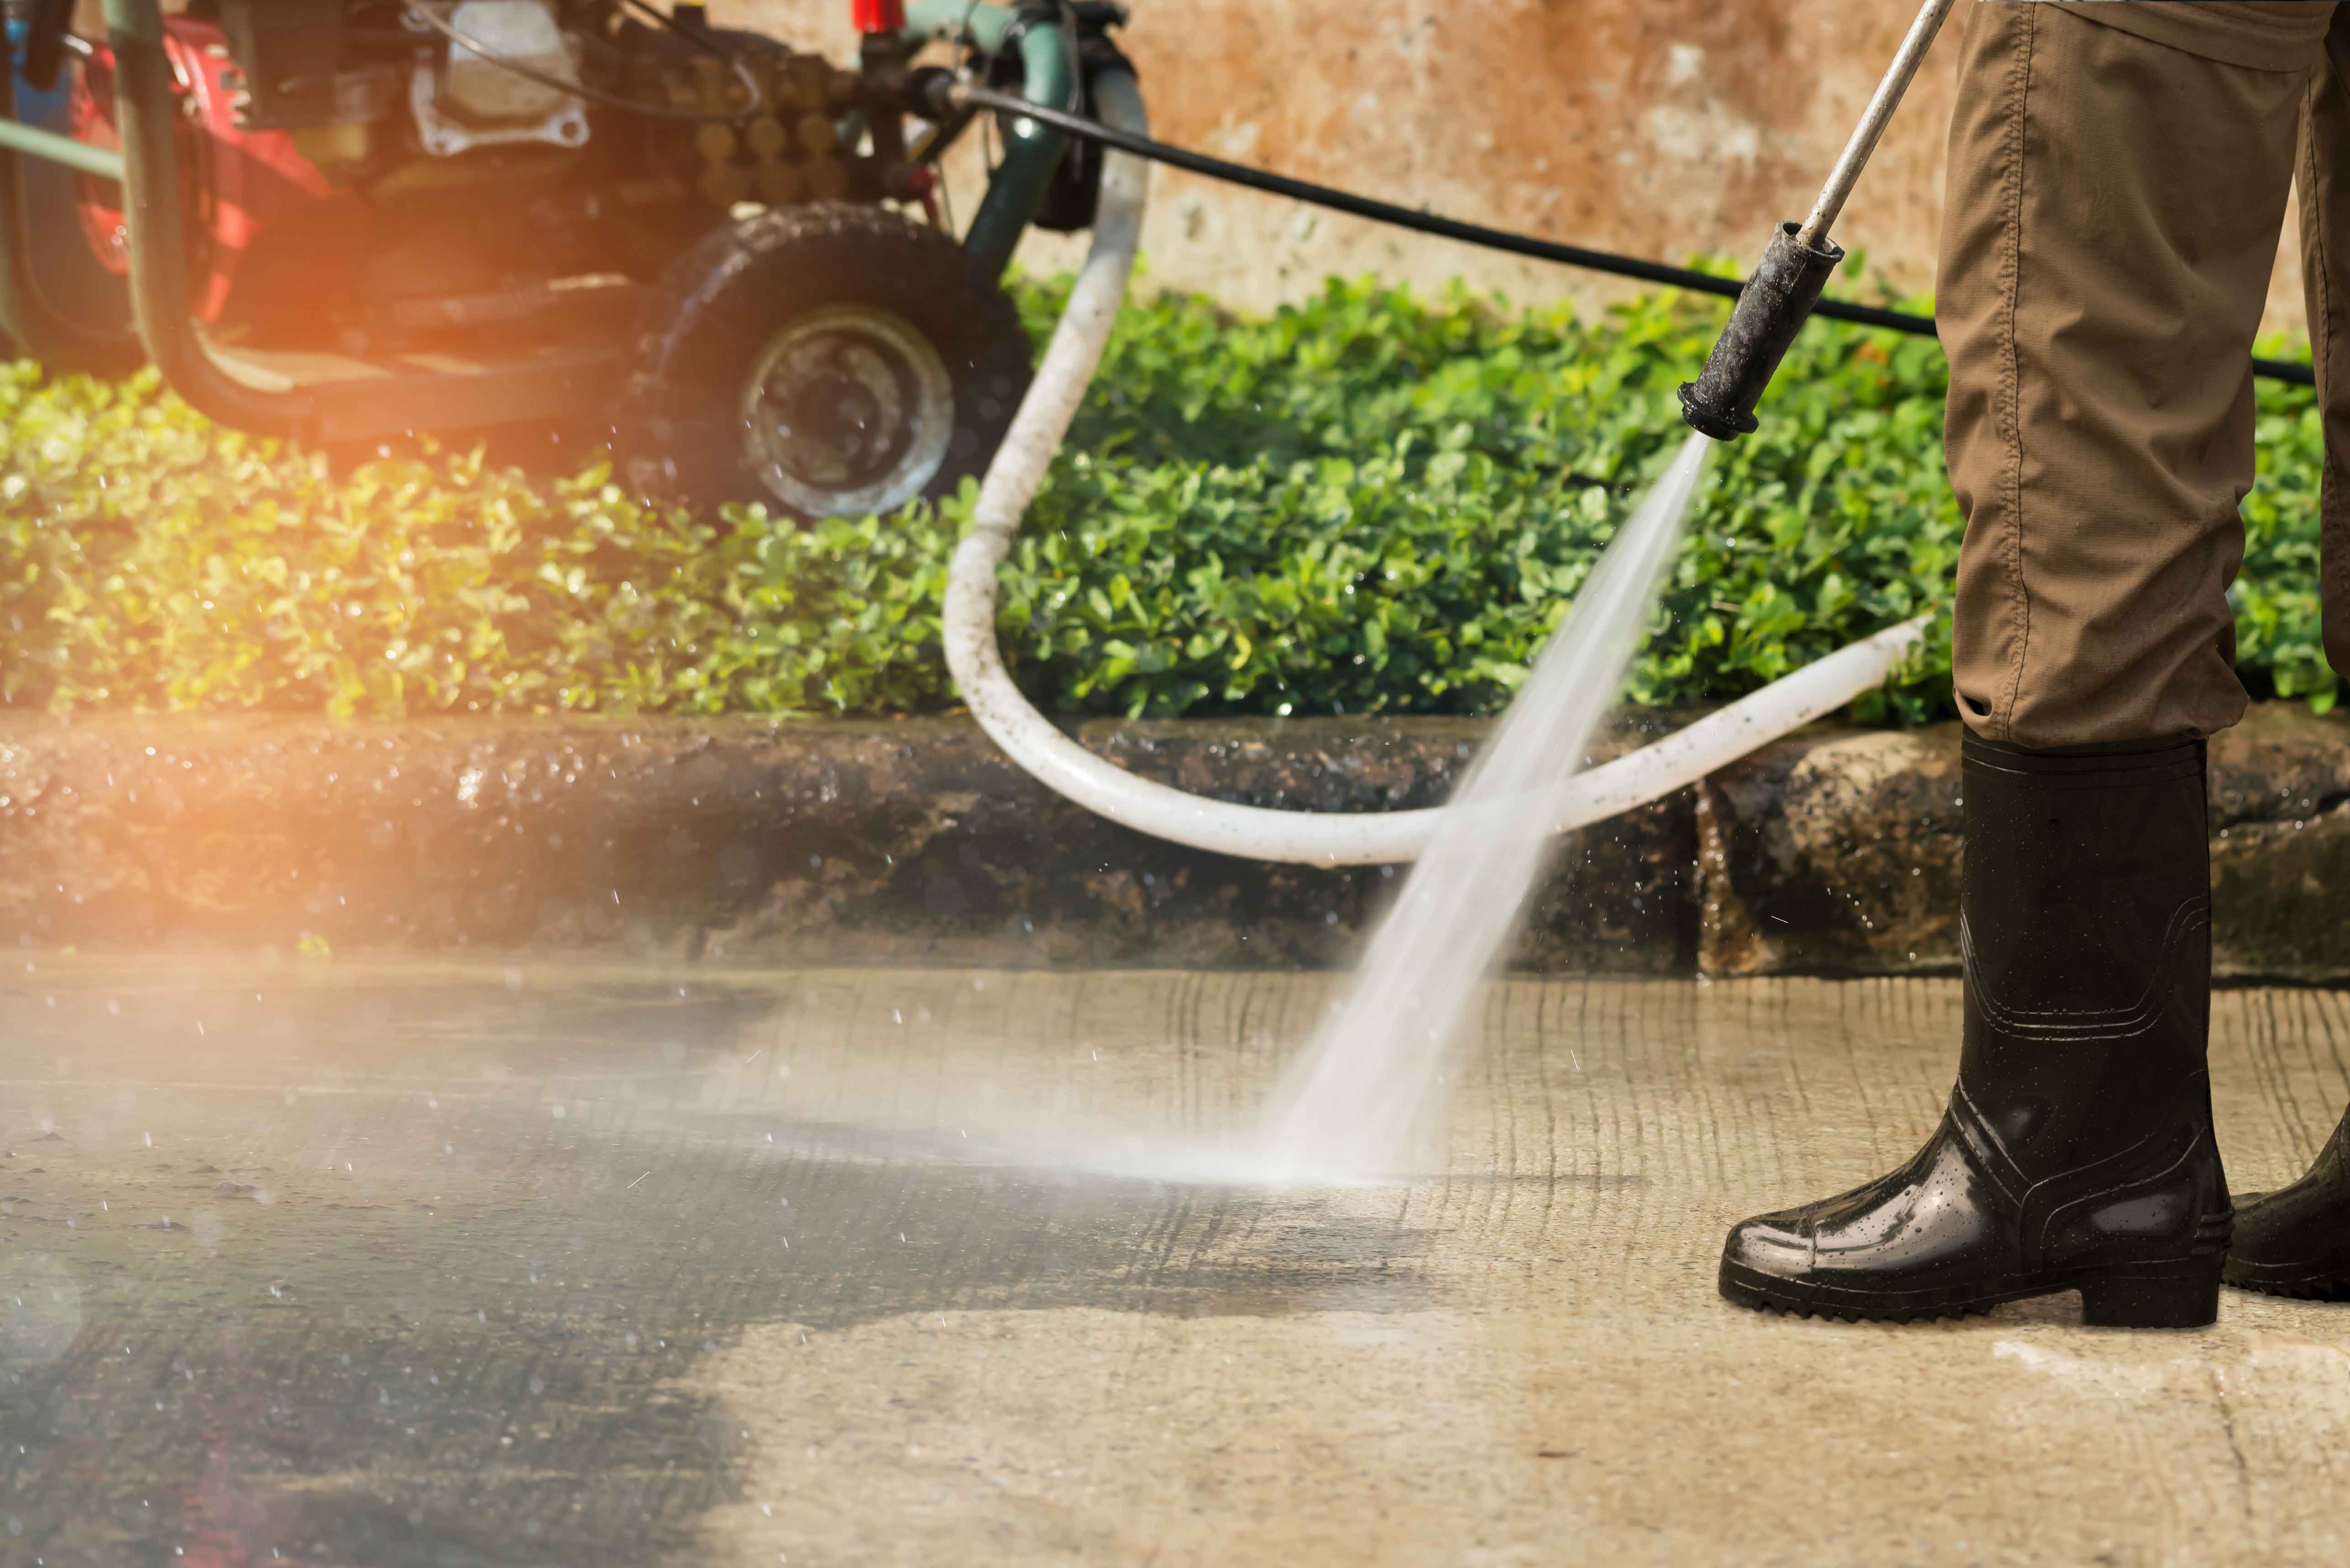 Picking A Replacement Pressure Washer Pump - How To Pick The